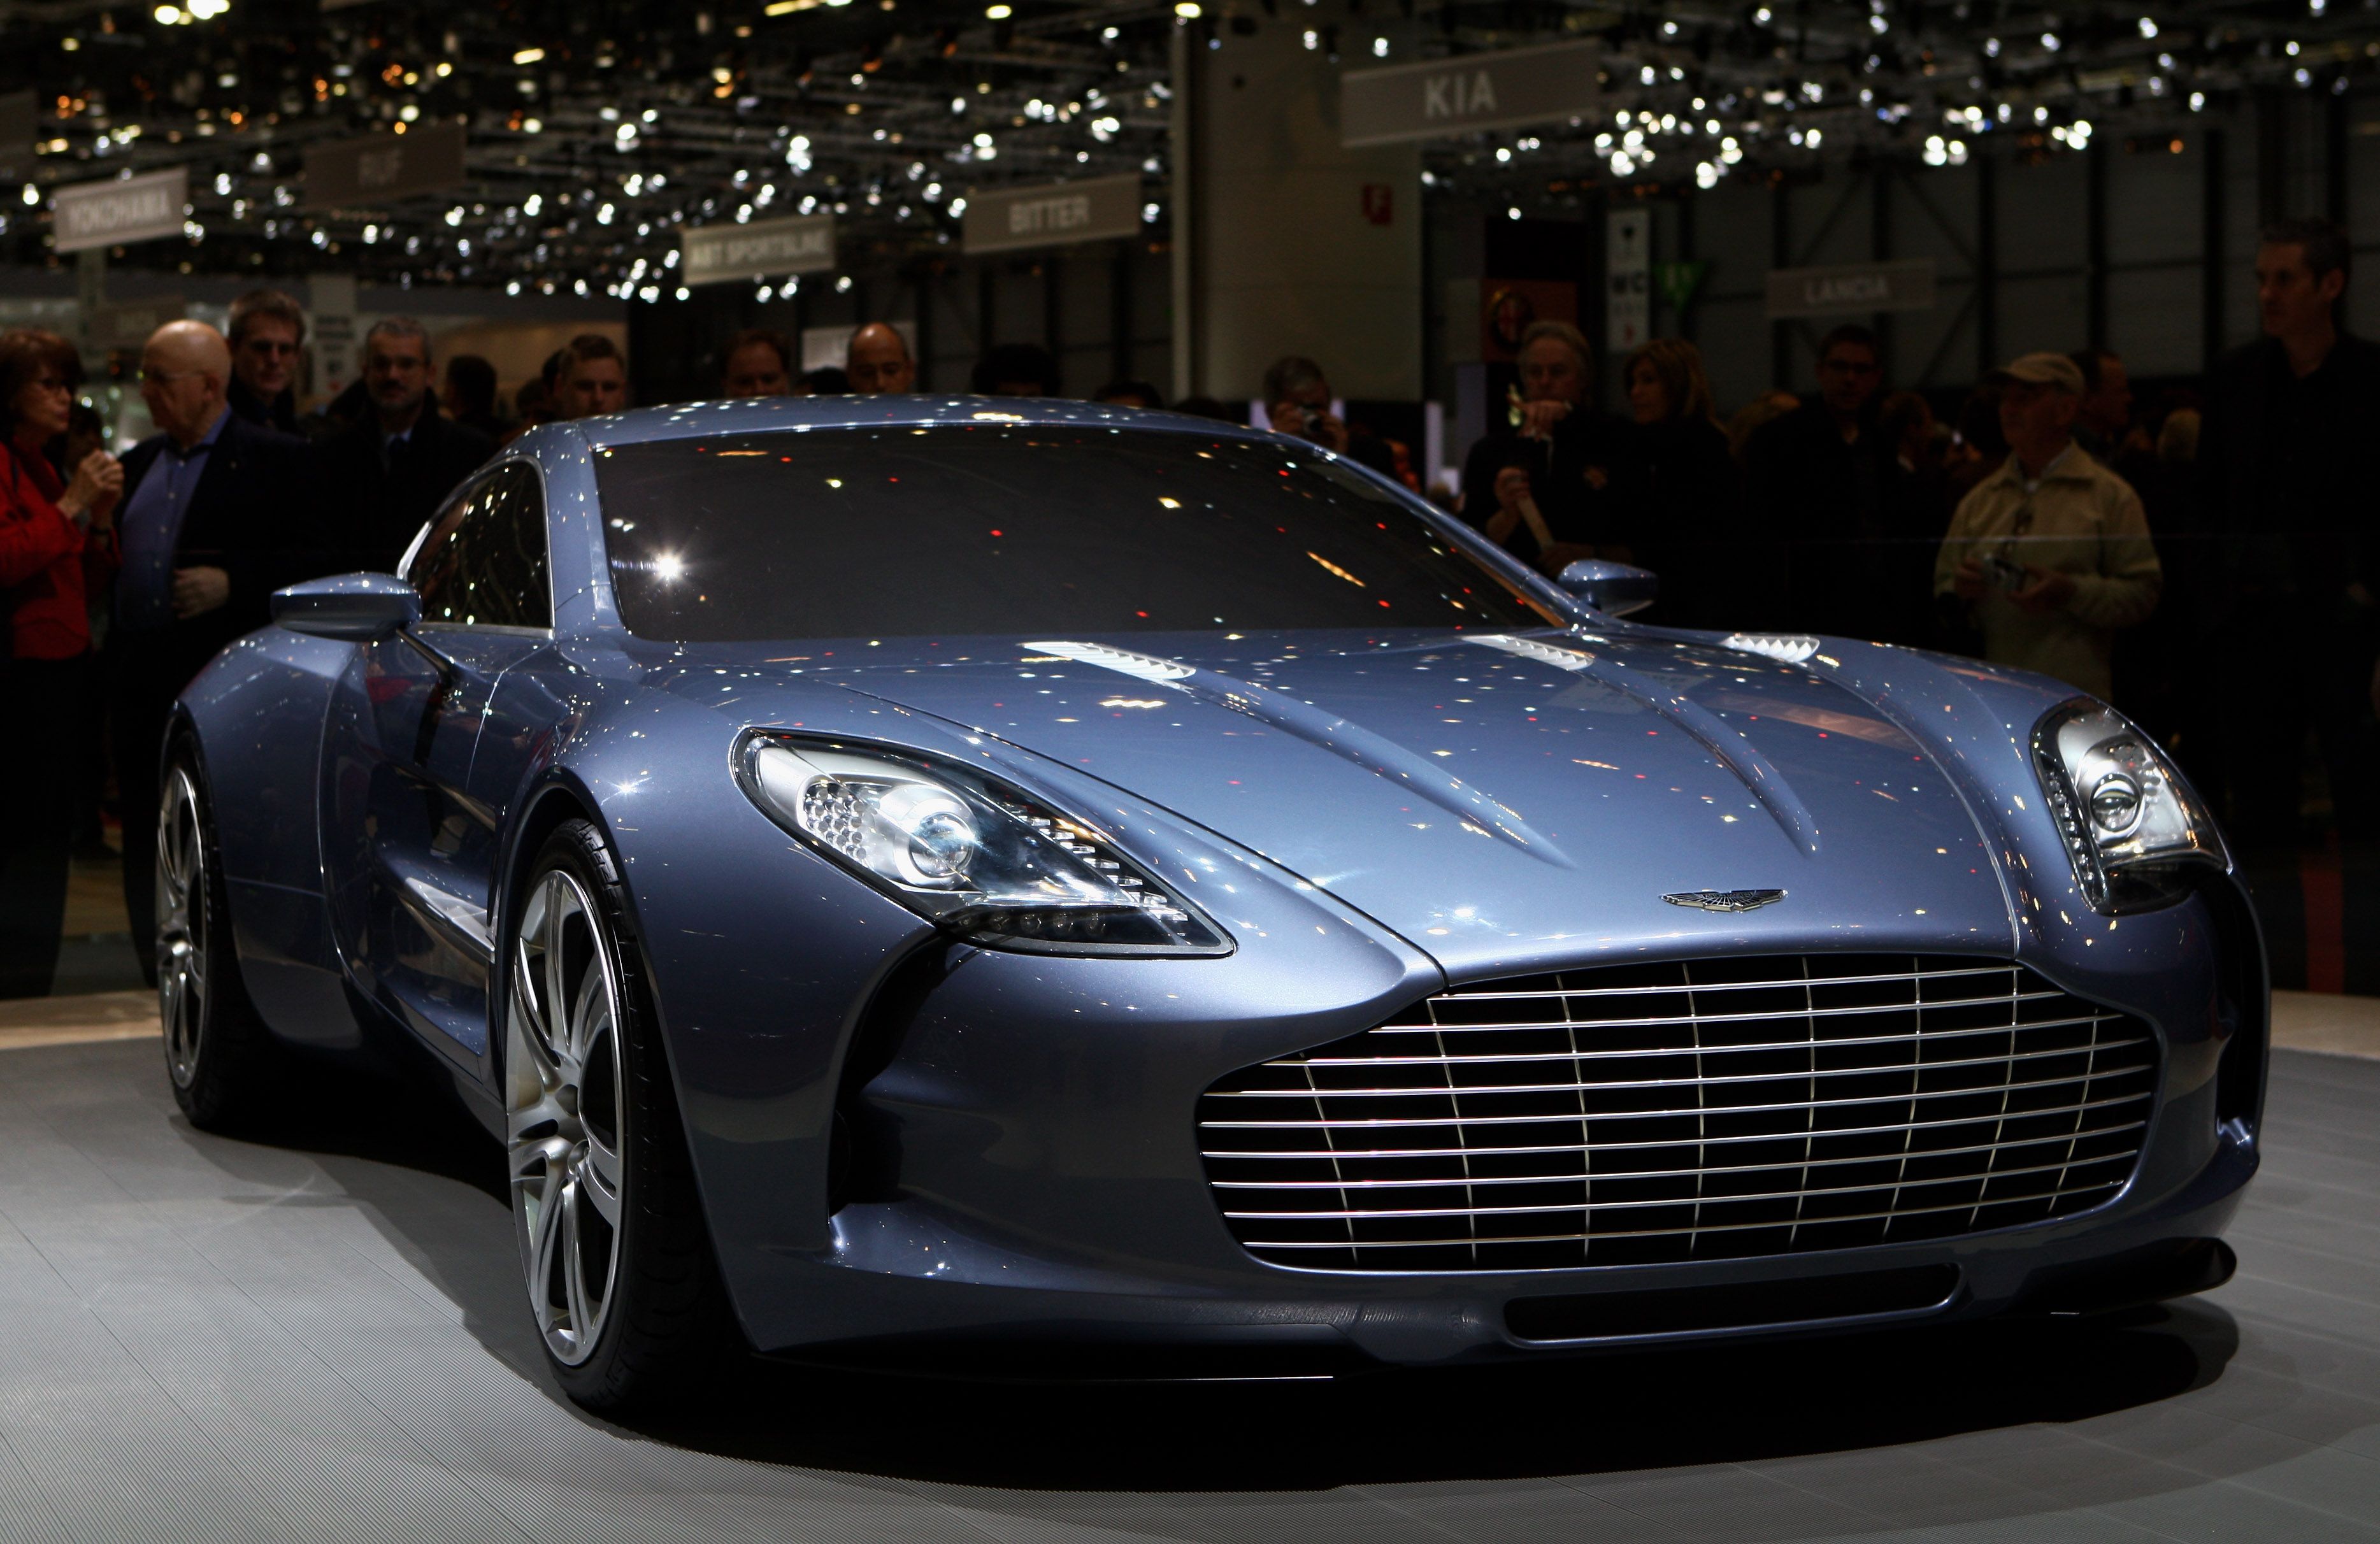 https://hips.hearstapps.com/hmg-prod/images/the-aston-martin-one-77-car-is-pictured-at-the-79th-geneva-news-photo-1627567890.jpg